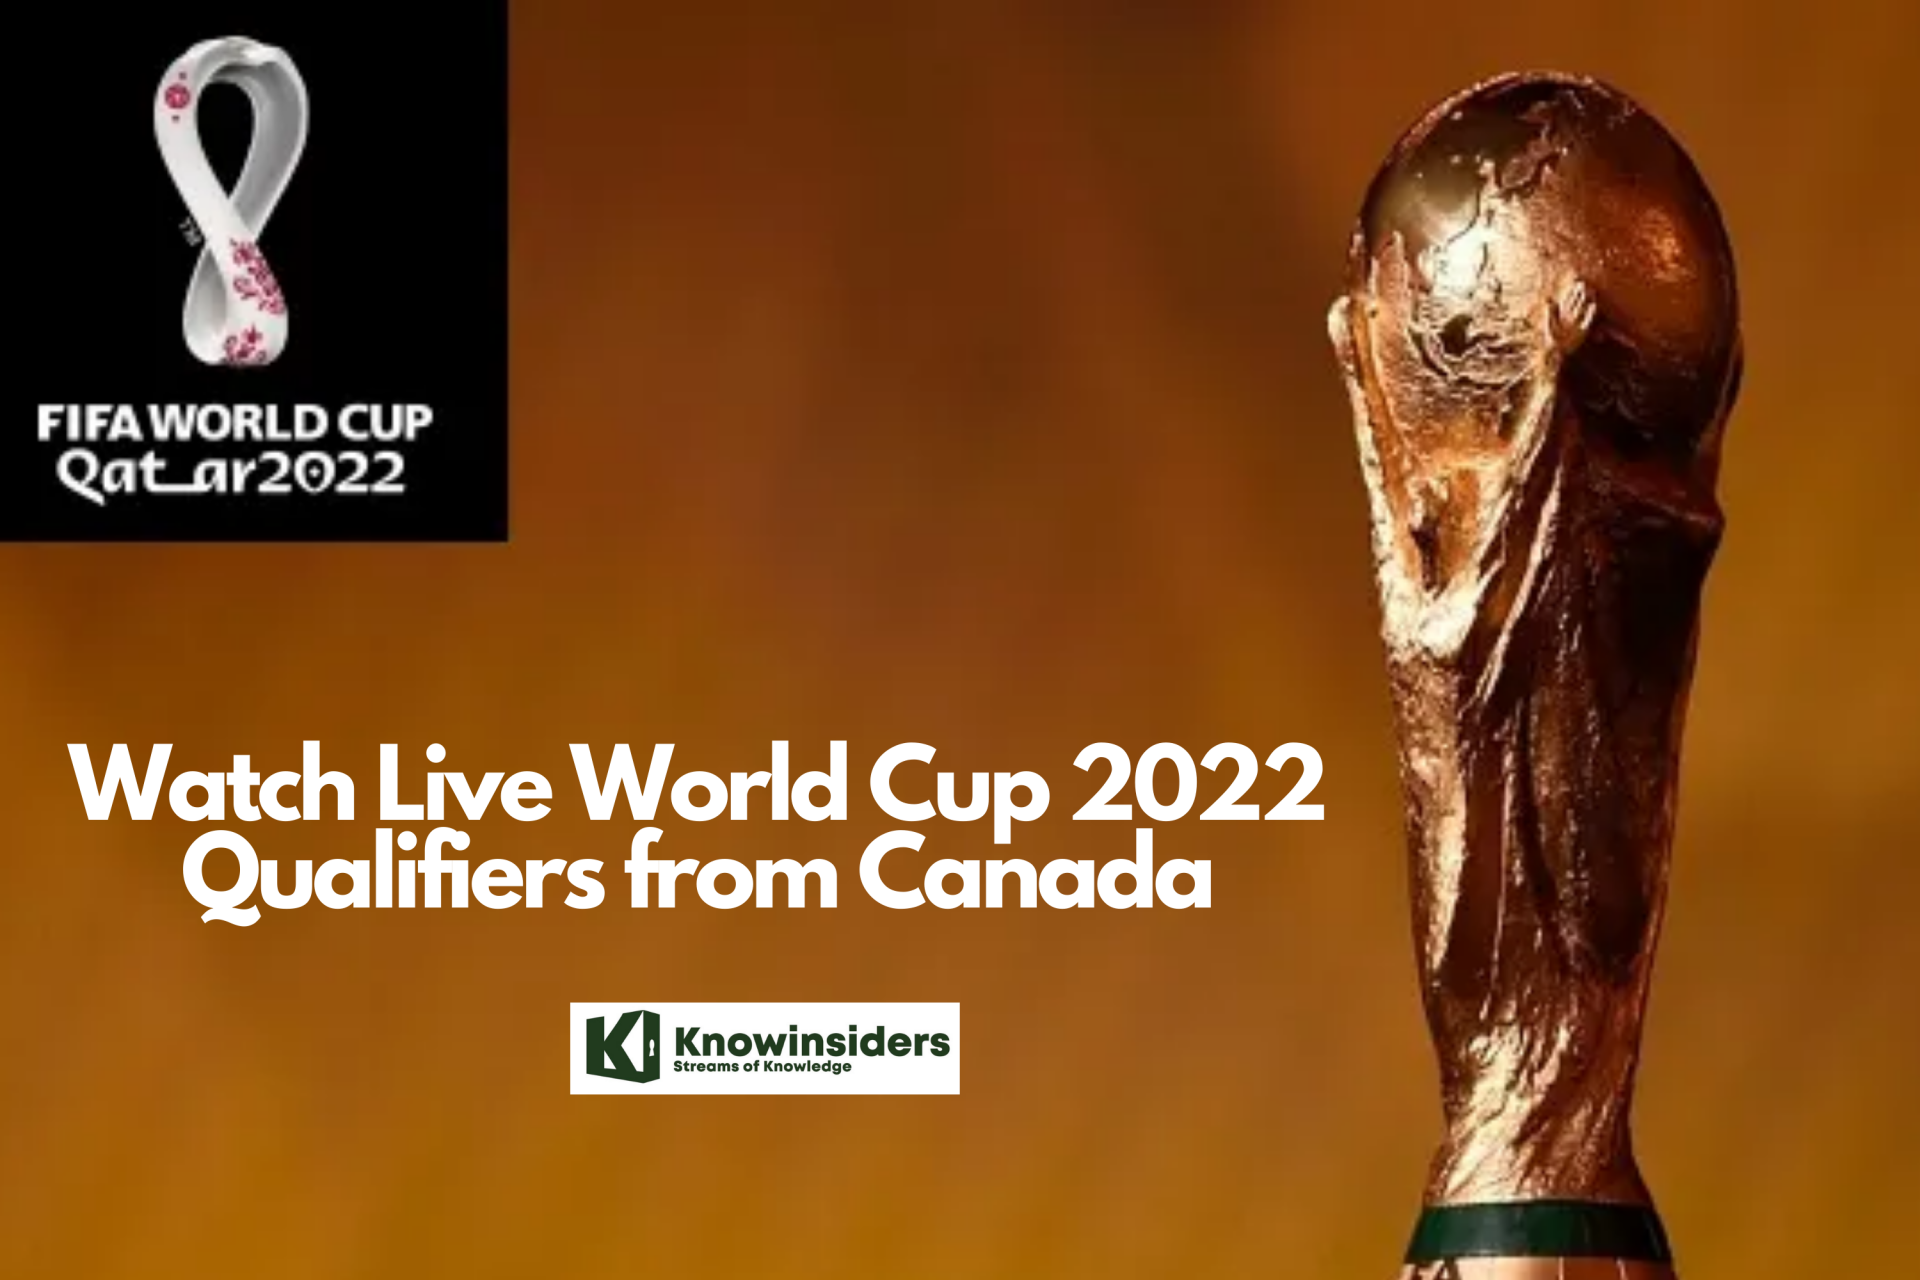 Watch Live World Cup 2022 Qualifiers In Canada: TV Channel, Stream Online